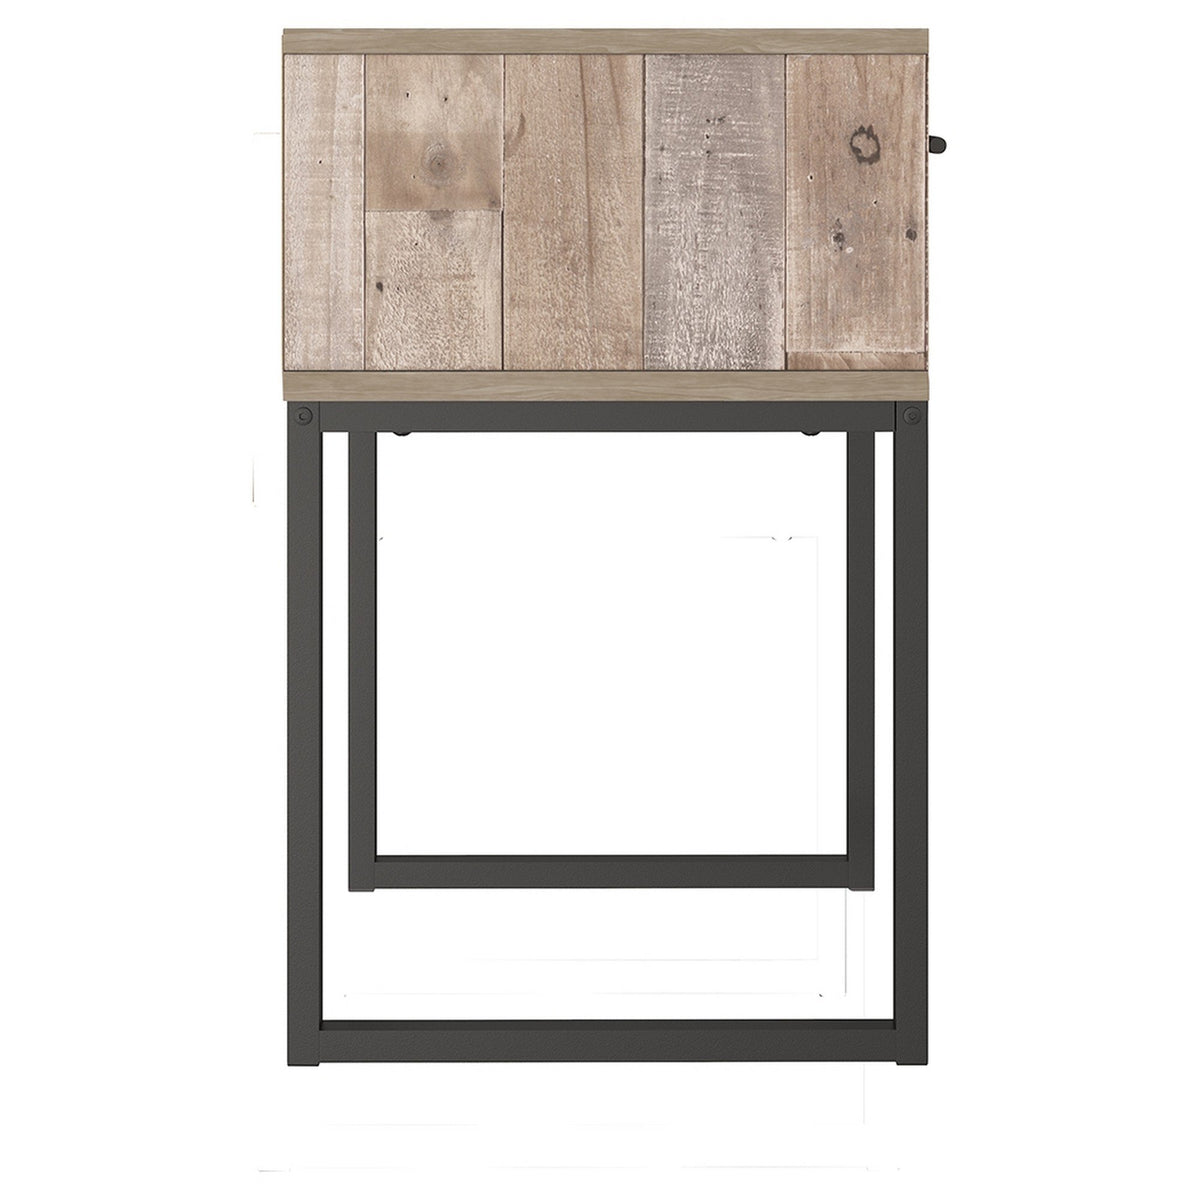 Rustic Wood Nightstand, Plank Design Drawer, Washed Brown and Black - BM226082